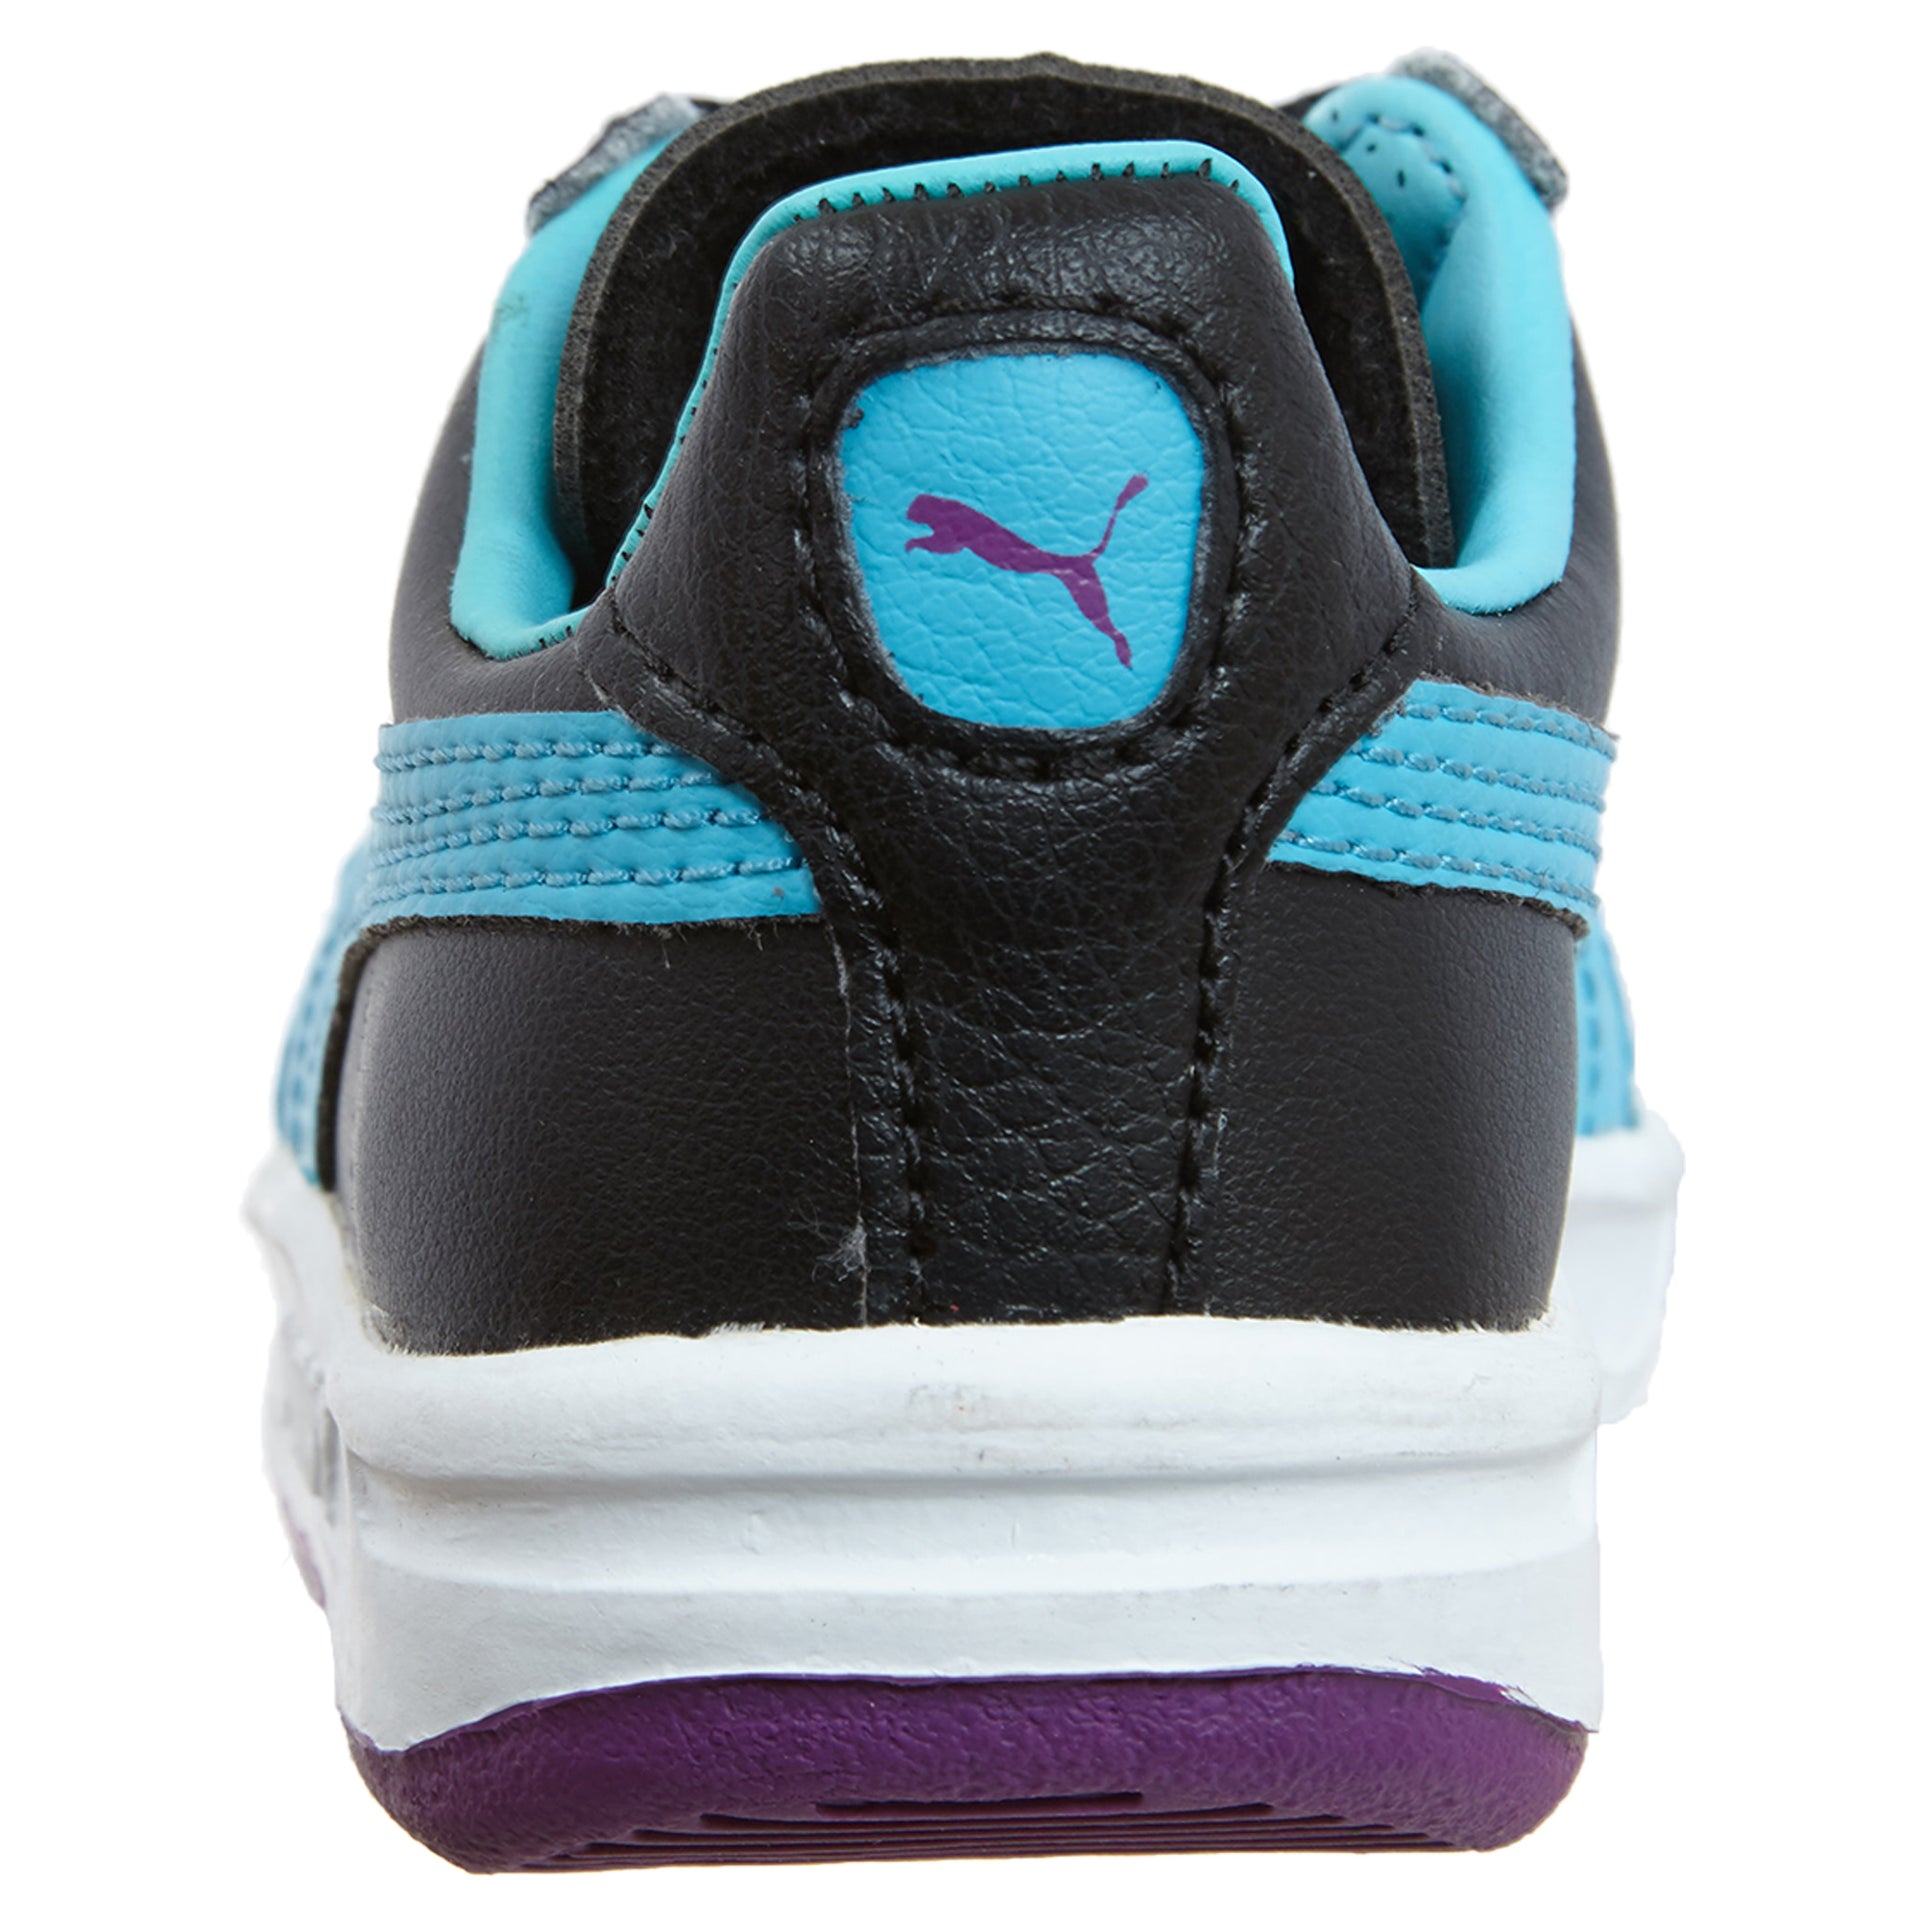 Puma Gv Special Toddlers Style : 351721